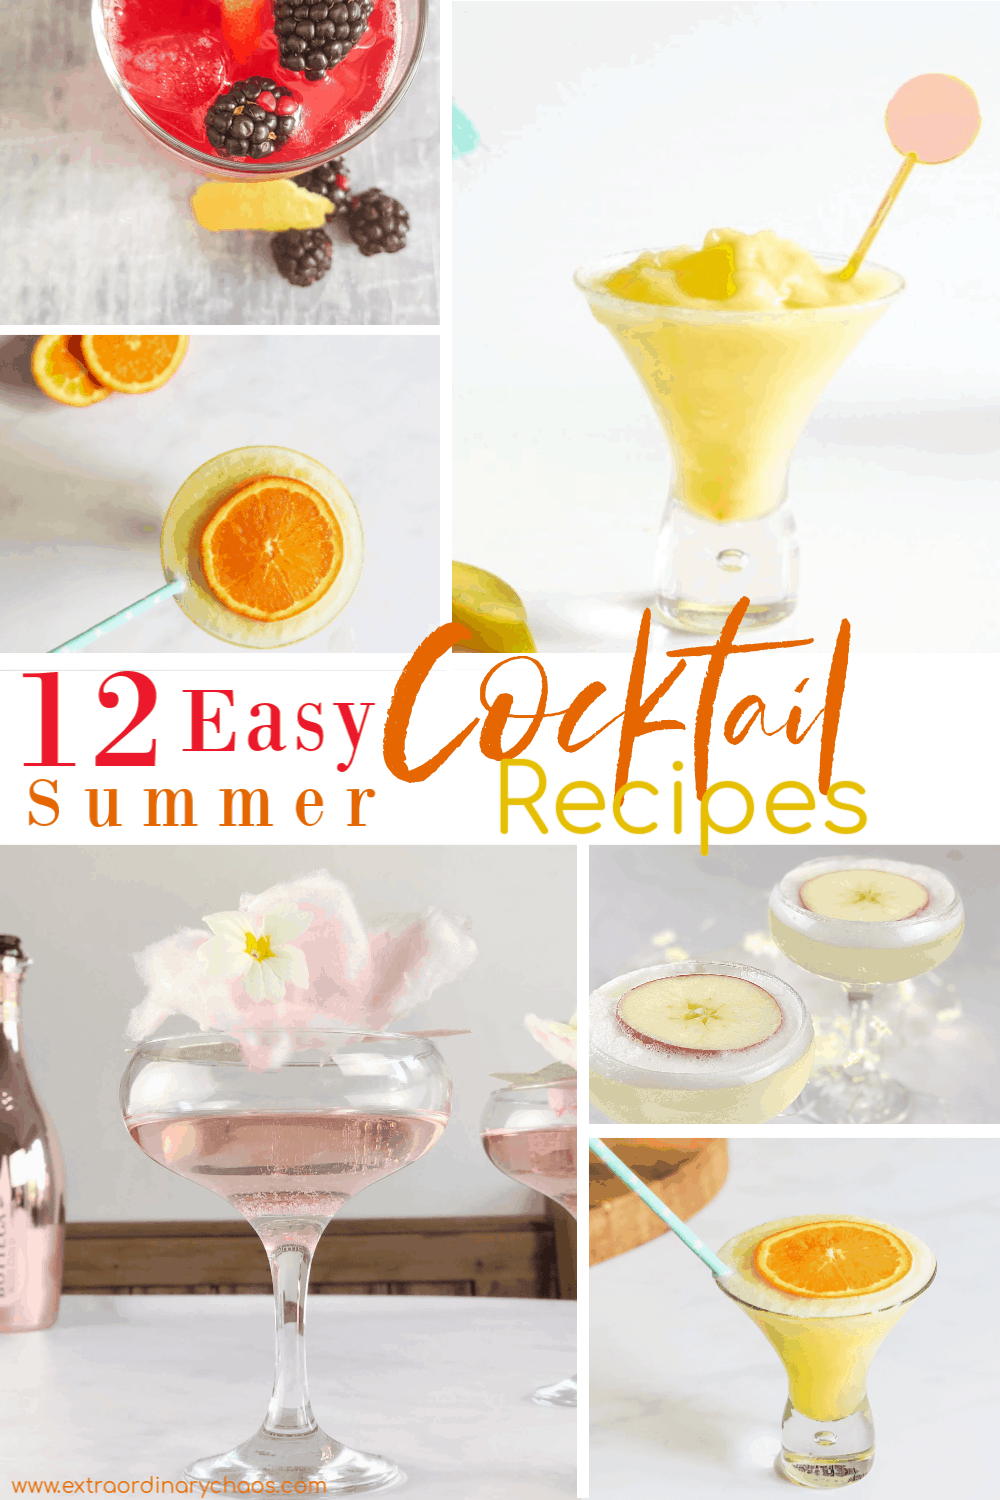 12 easy cocktail recipes for summer days and garden parties #cocktails #cocktailrecipes #gincocktails #summercocktails